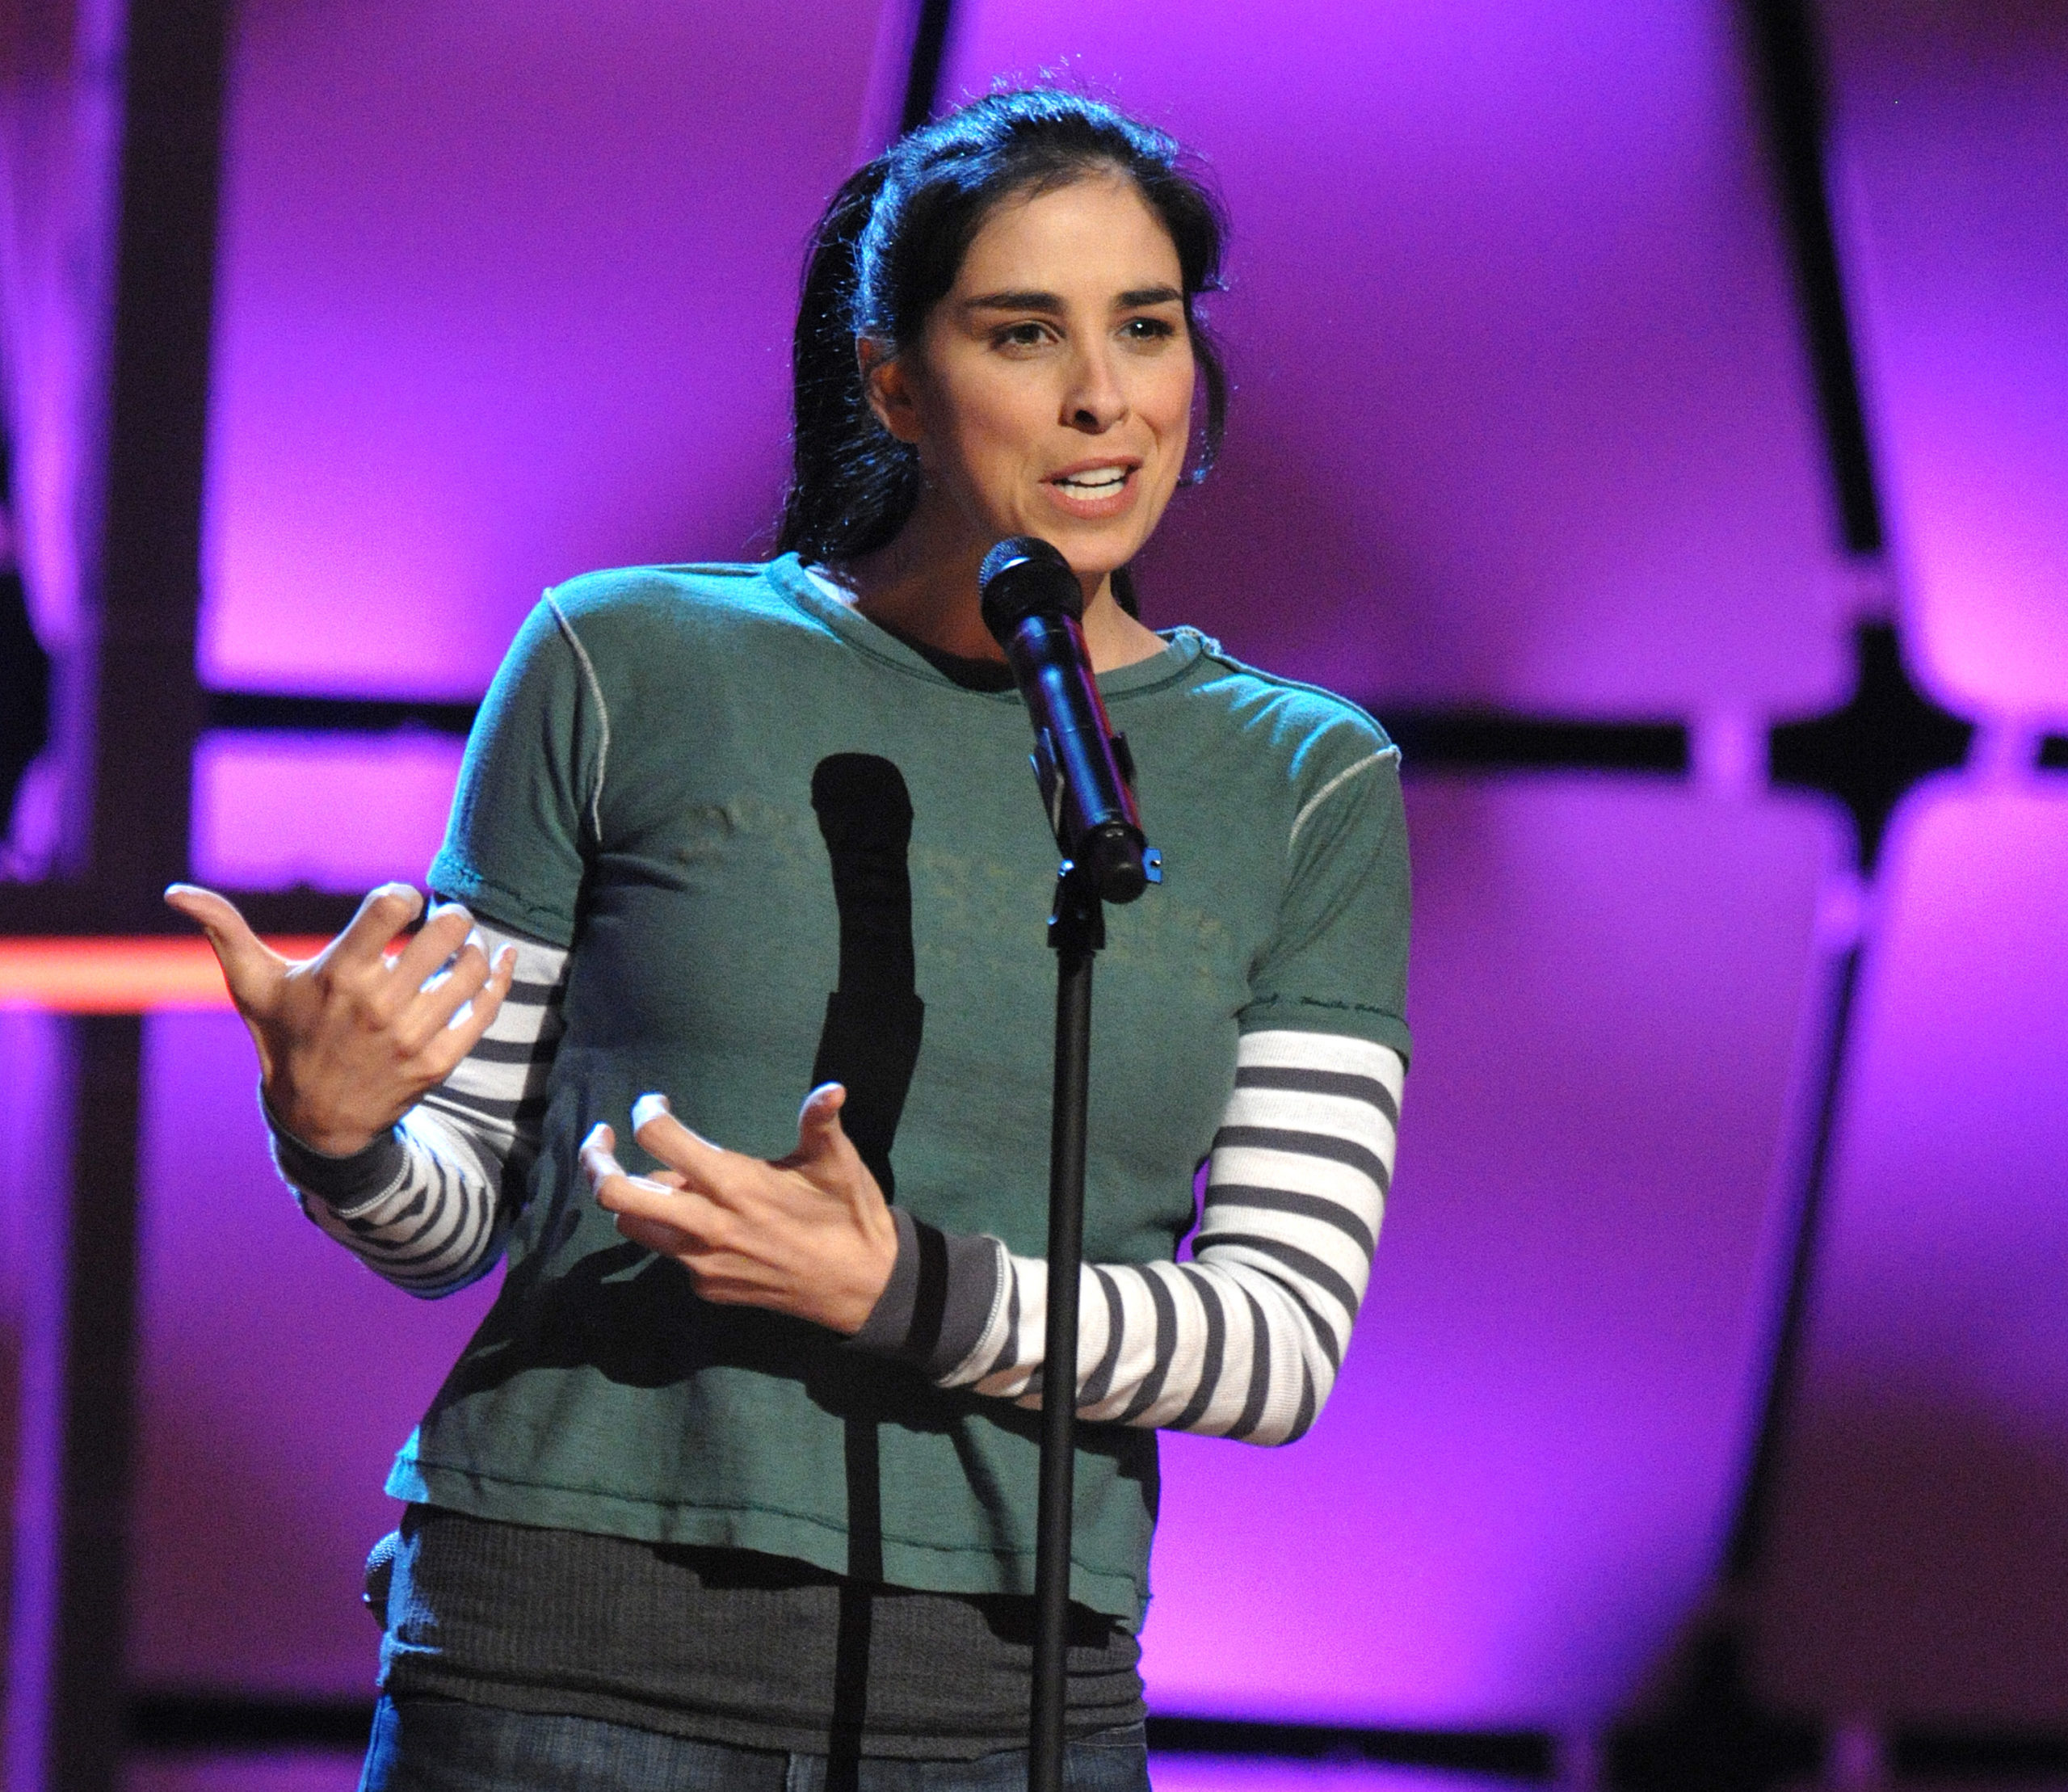 50 Best Stand-Up Comics of All Time